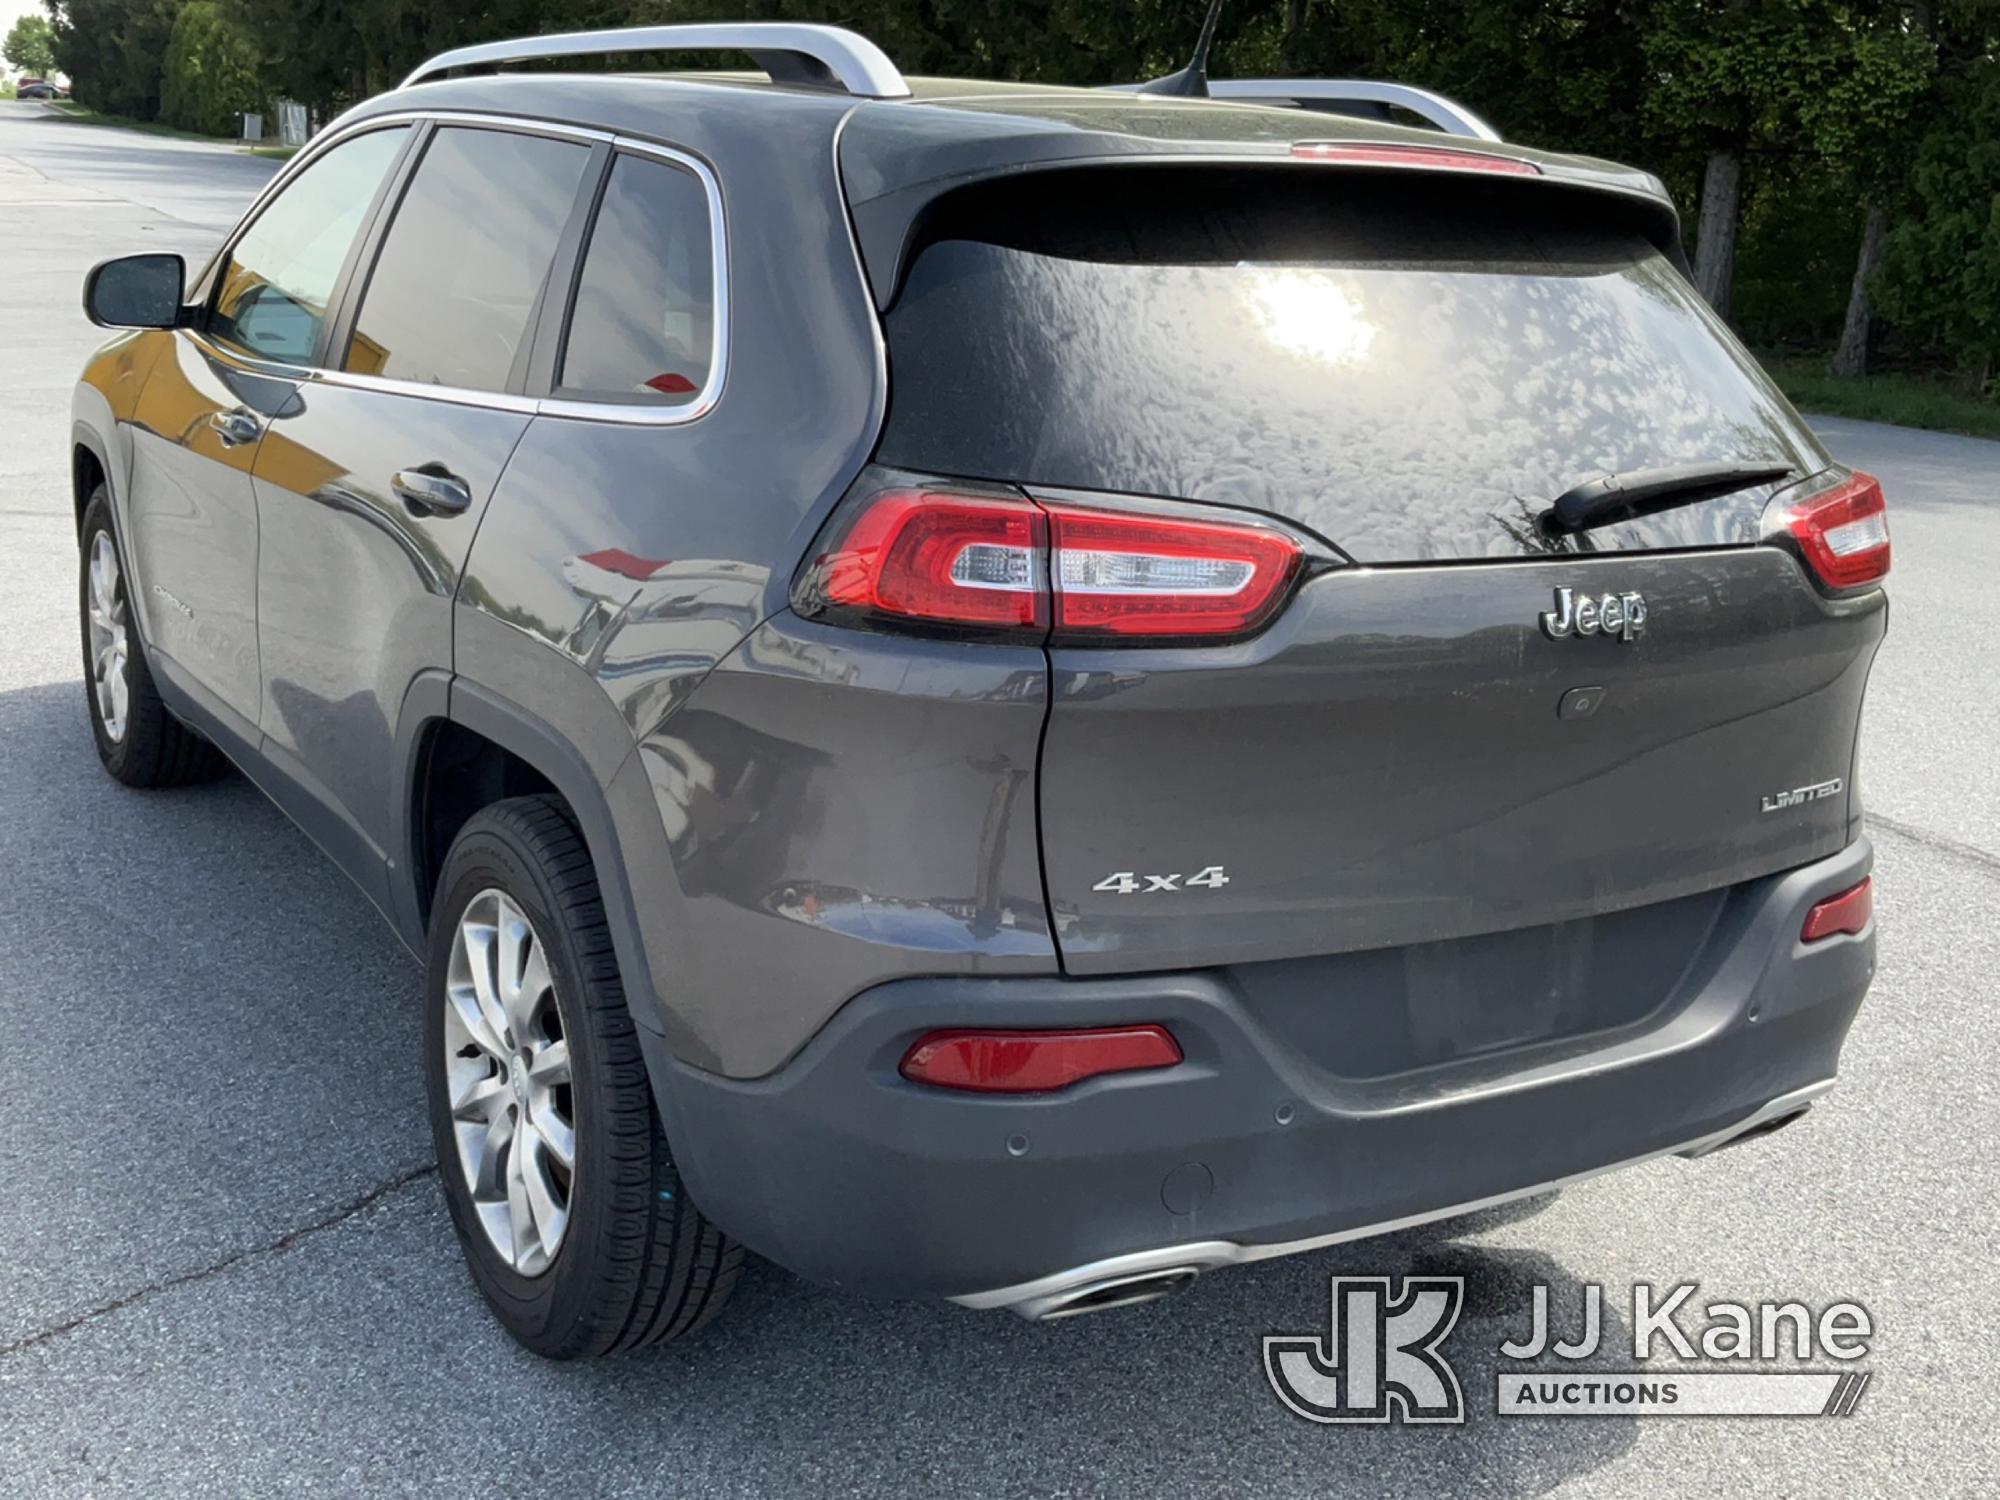 (Chester Springs, PA) 2018 Jeep Cherokee 4x4 4-Door Sport Utility Vehicle Runs & Moves) (Body Damage